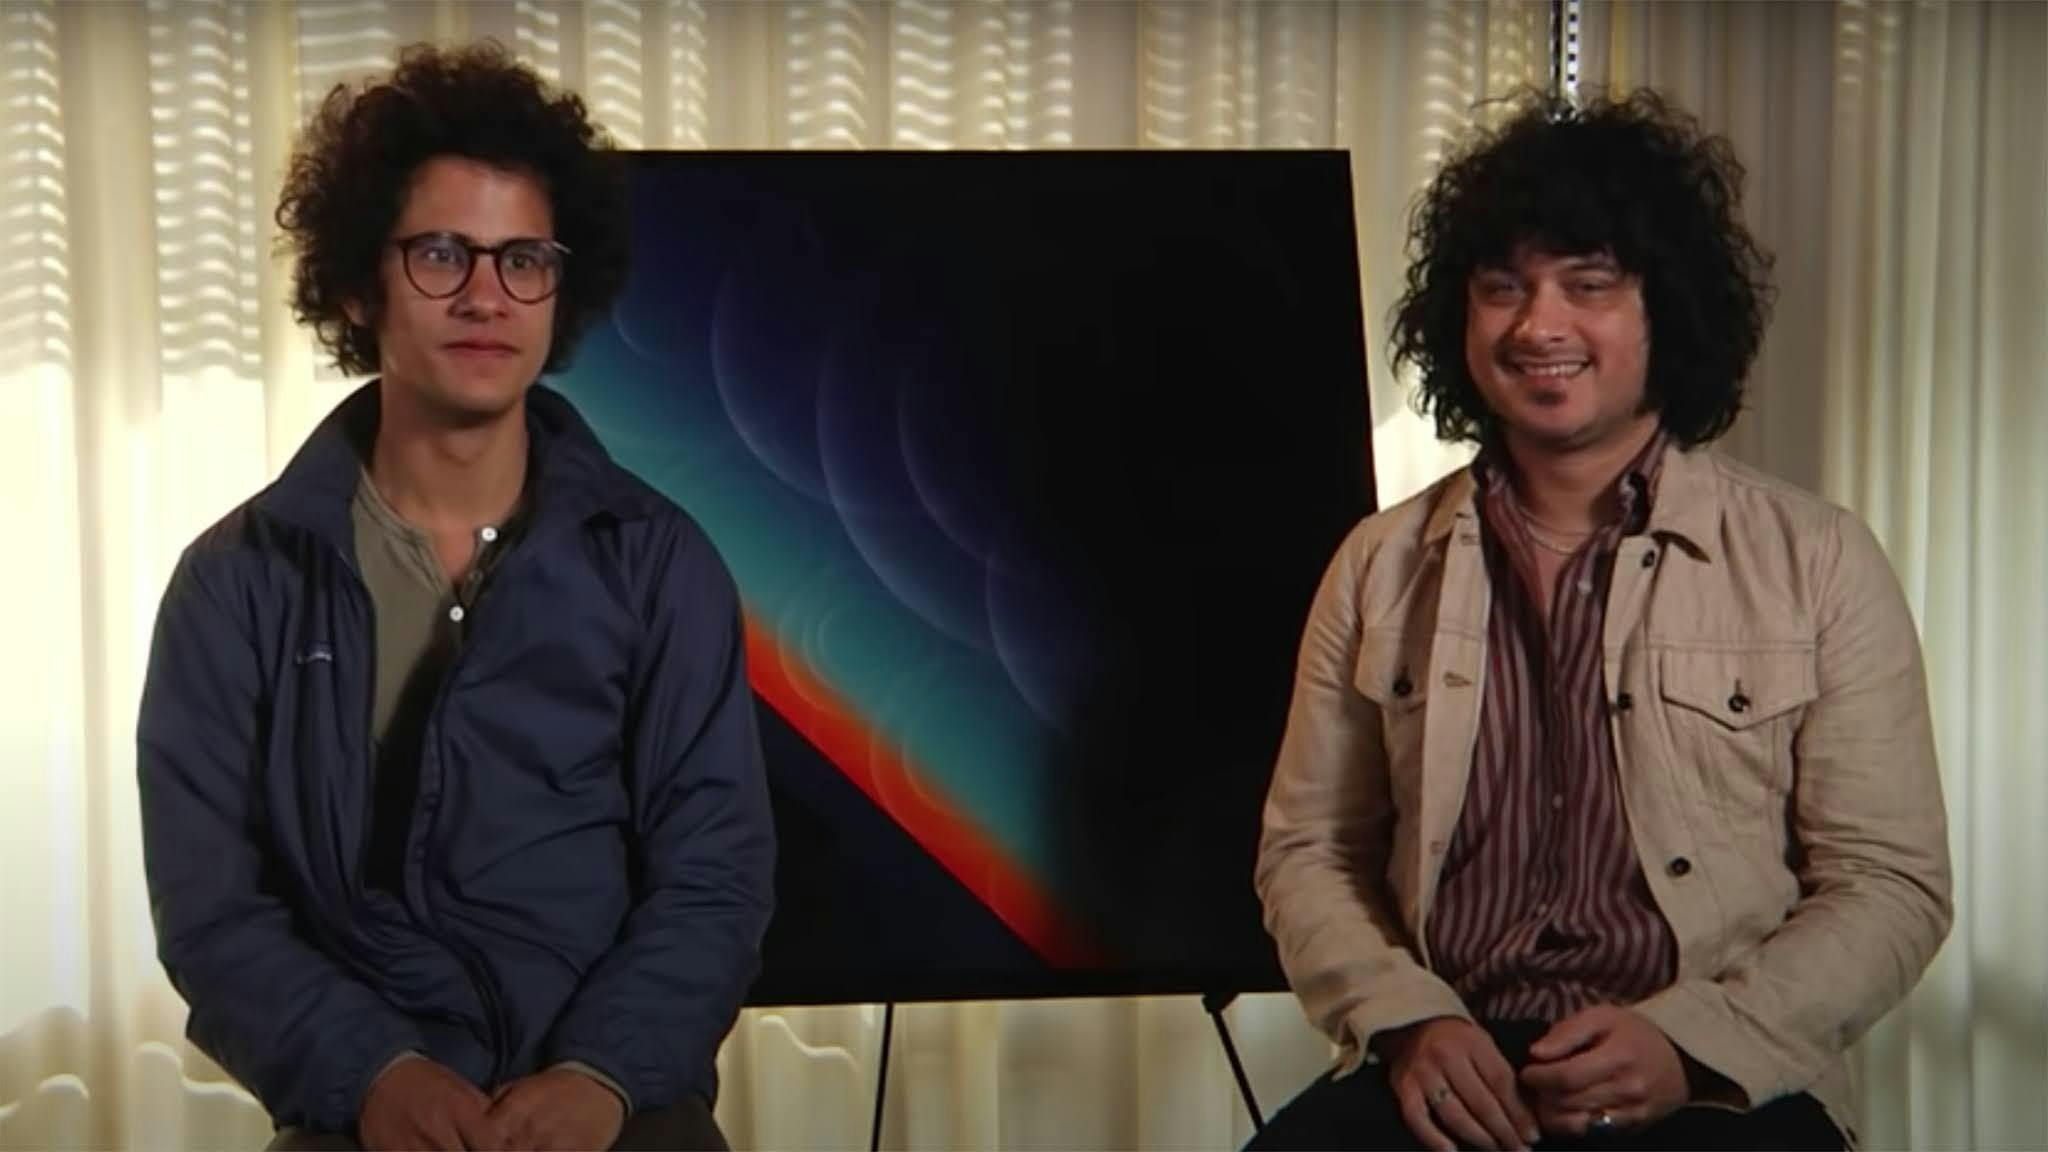 Kanye West To The Mars Volta: “We Need To Finish The Album”